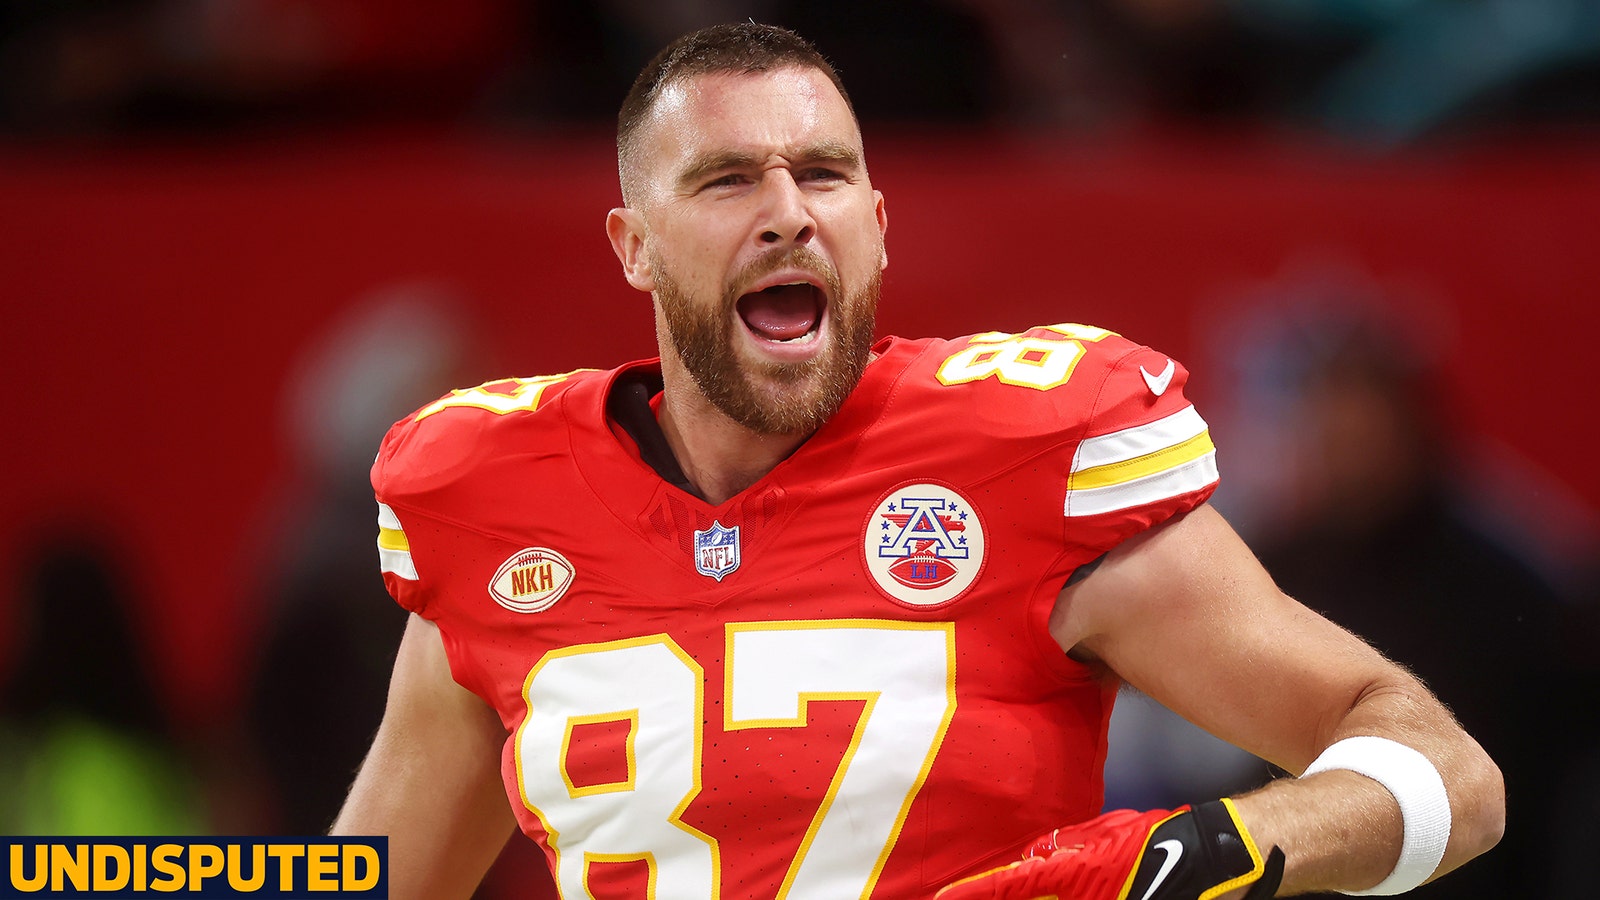 Travis Kelce: "I think about retirement more than anyone could imagine"